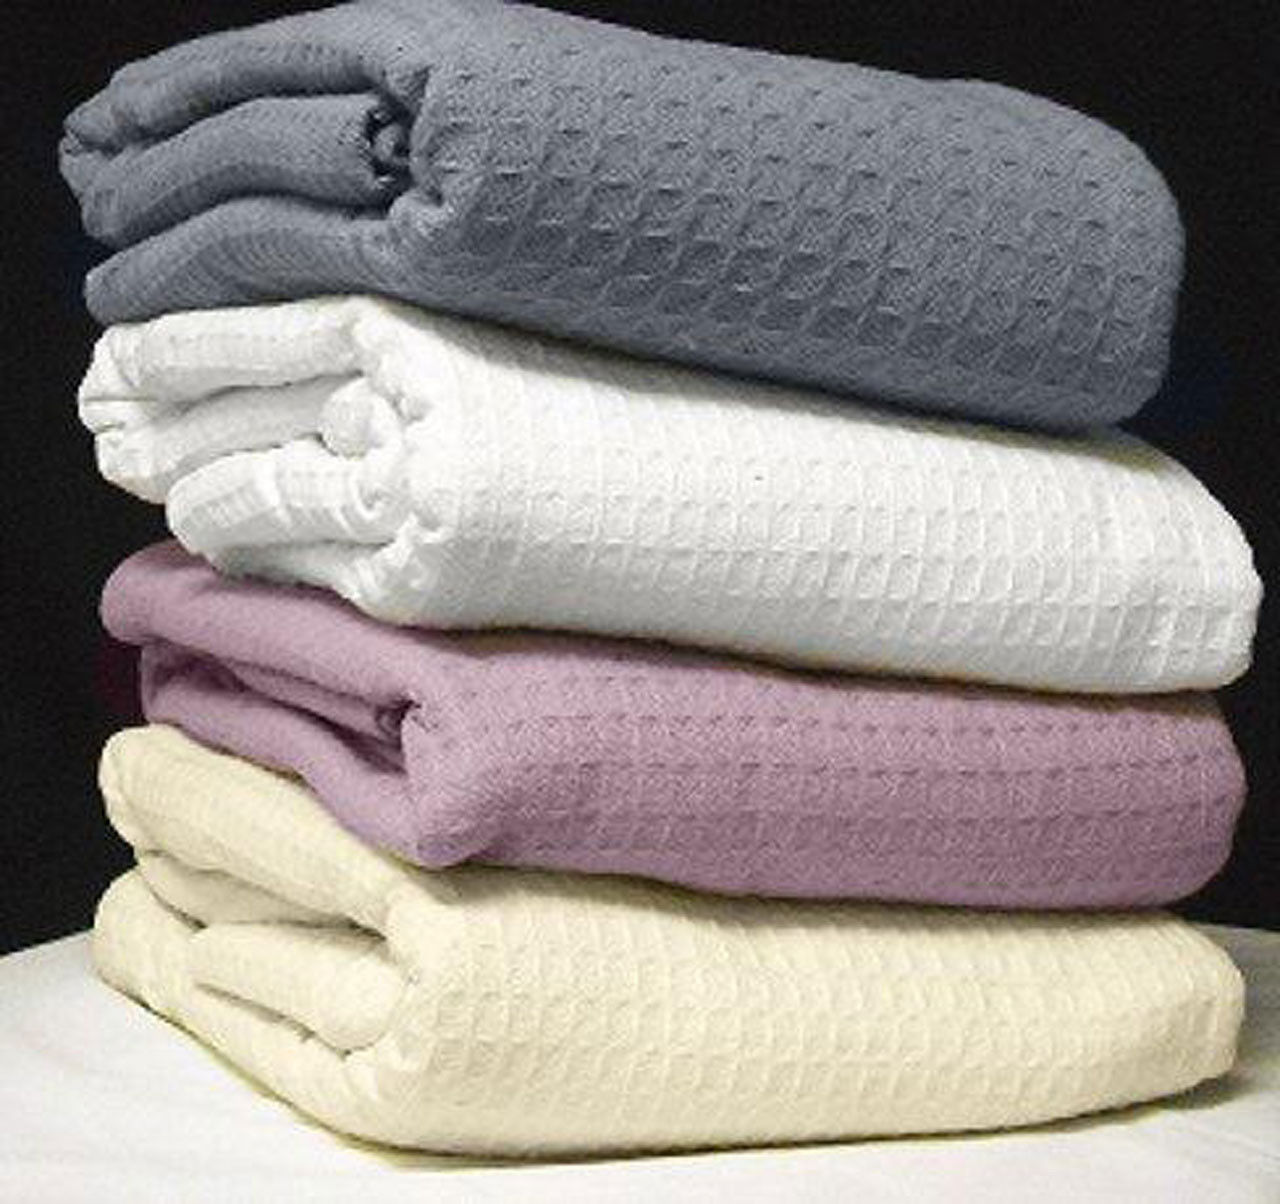 What unique characteristics does the Santa Clarita blanket, a Cotton Thermal Blanket, possess?